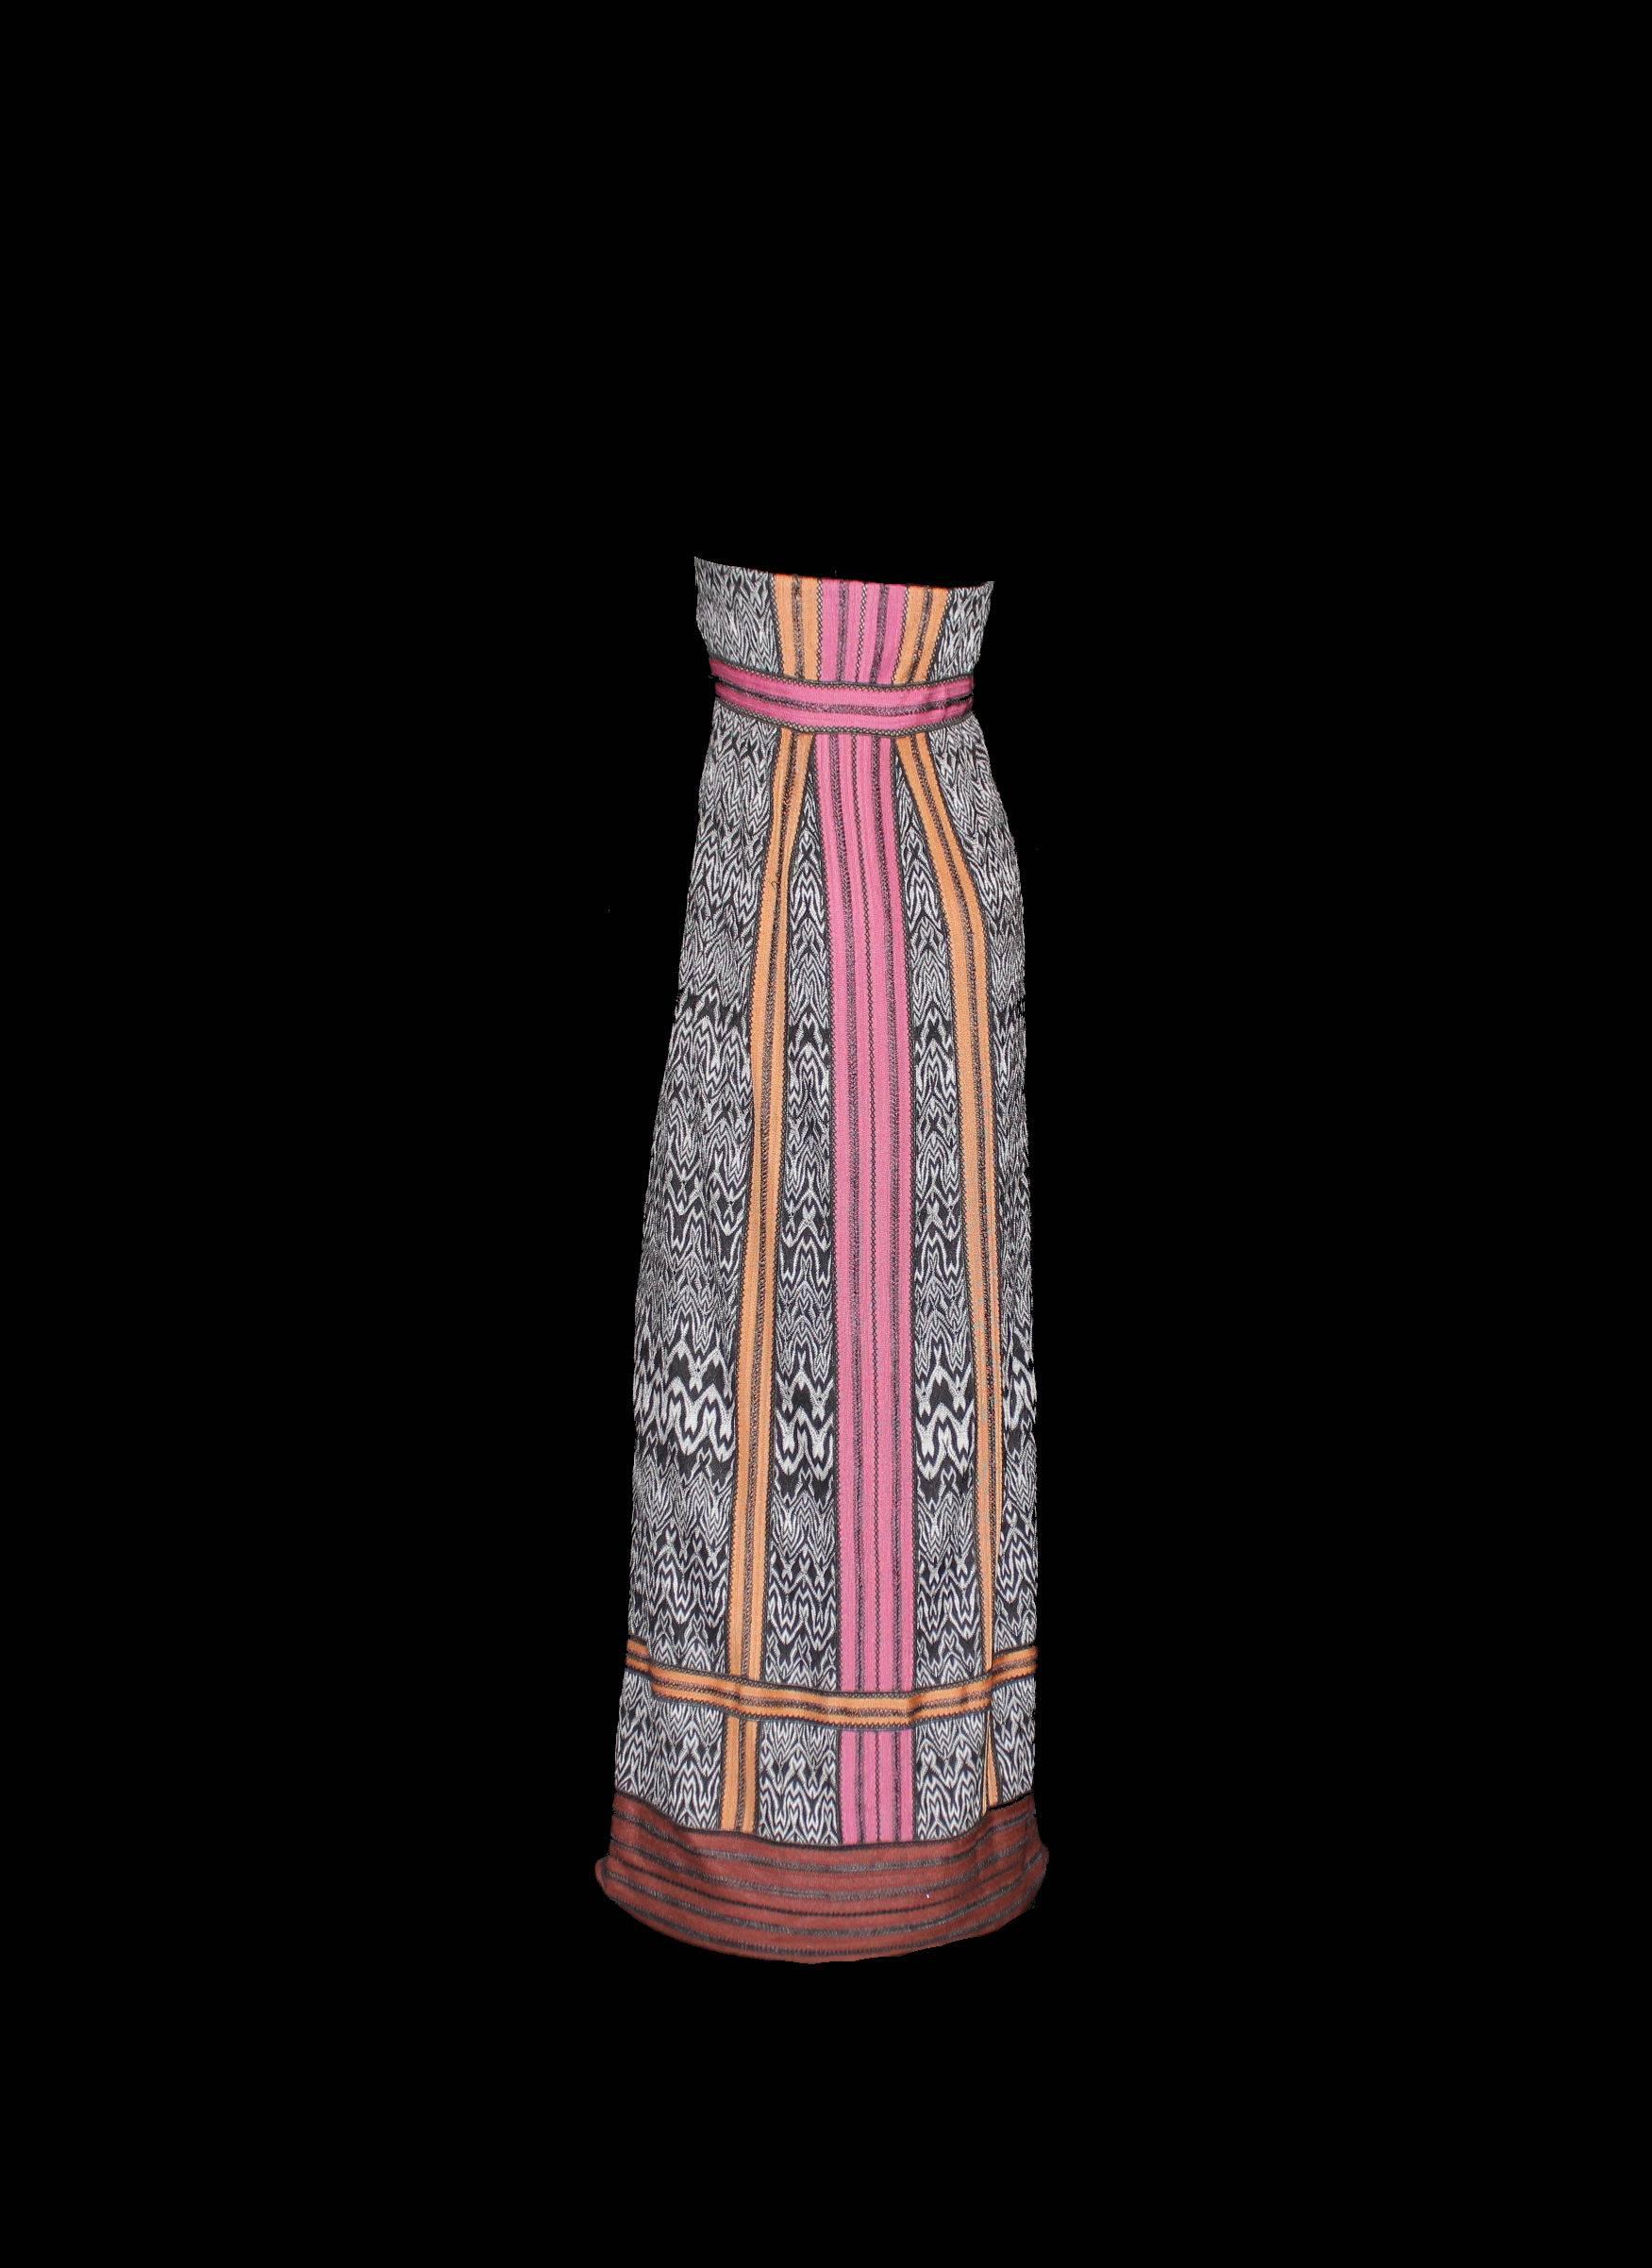 Women's NEW Missoni Monochrome Crochet Knit Maxi Dress Gown with Colorblock Trimming